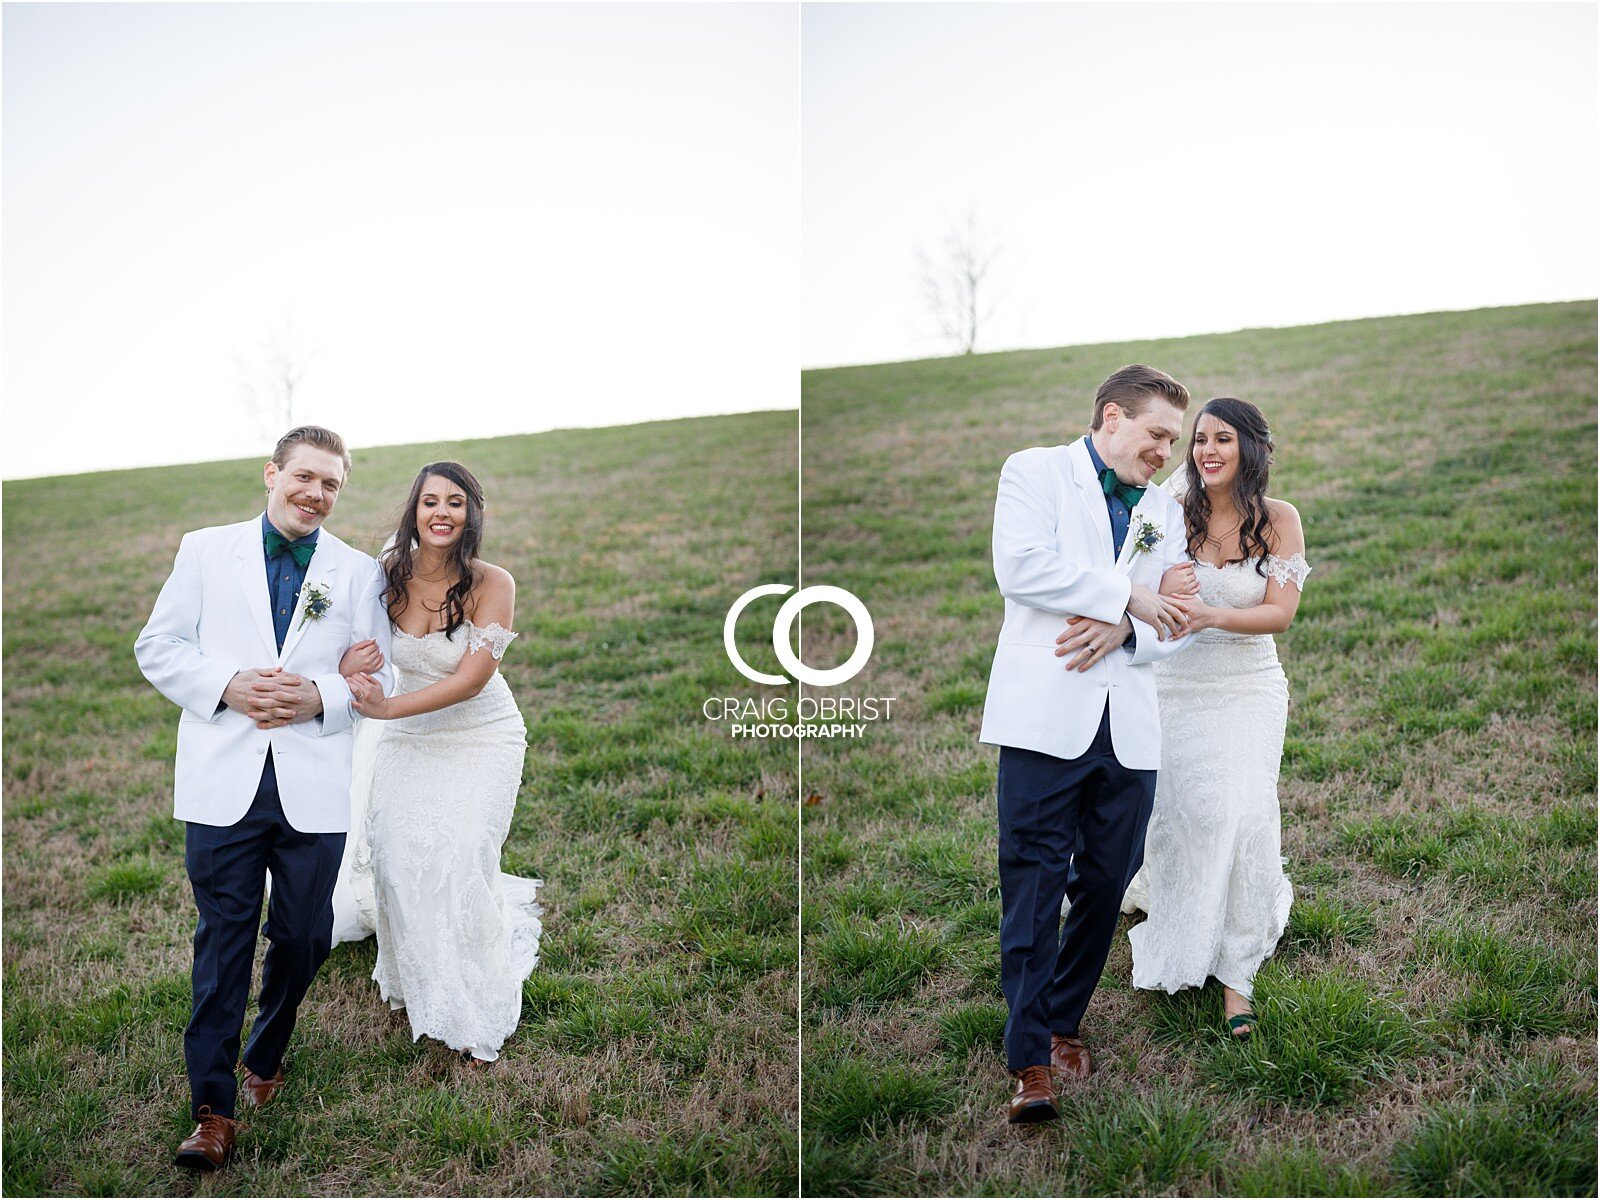 in the woods events wedding portraits sunset photographer_0104.jpg